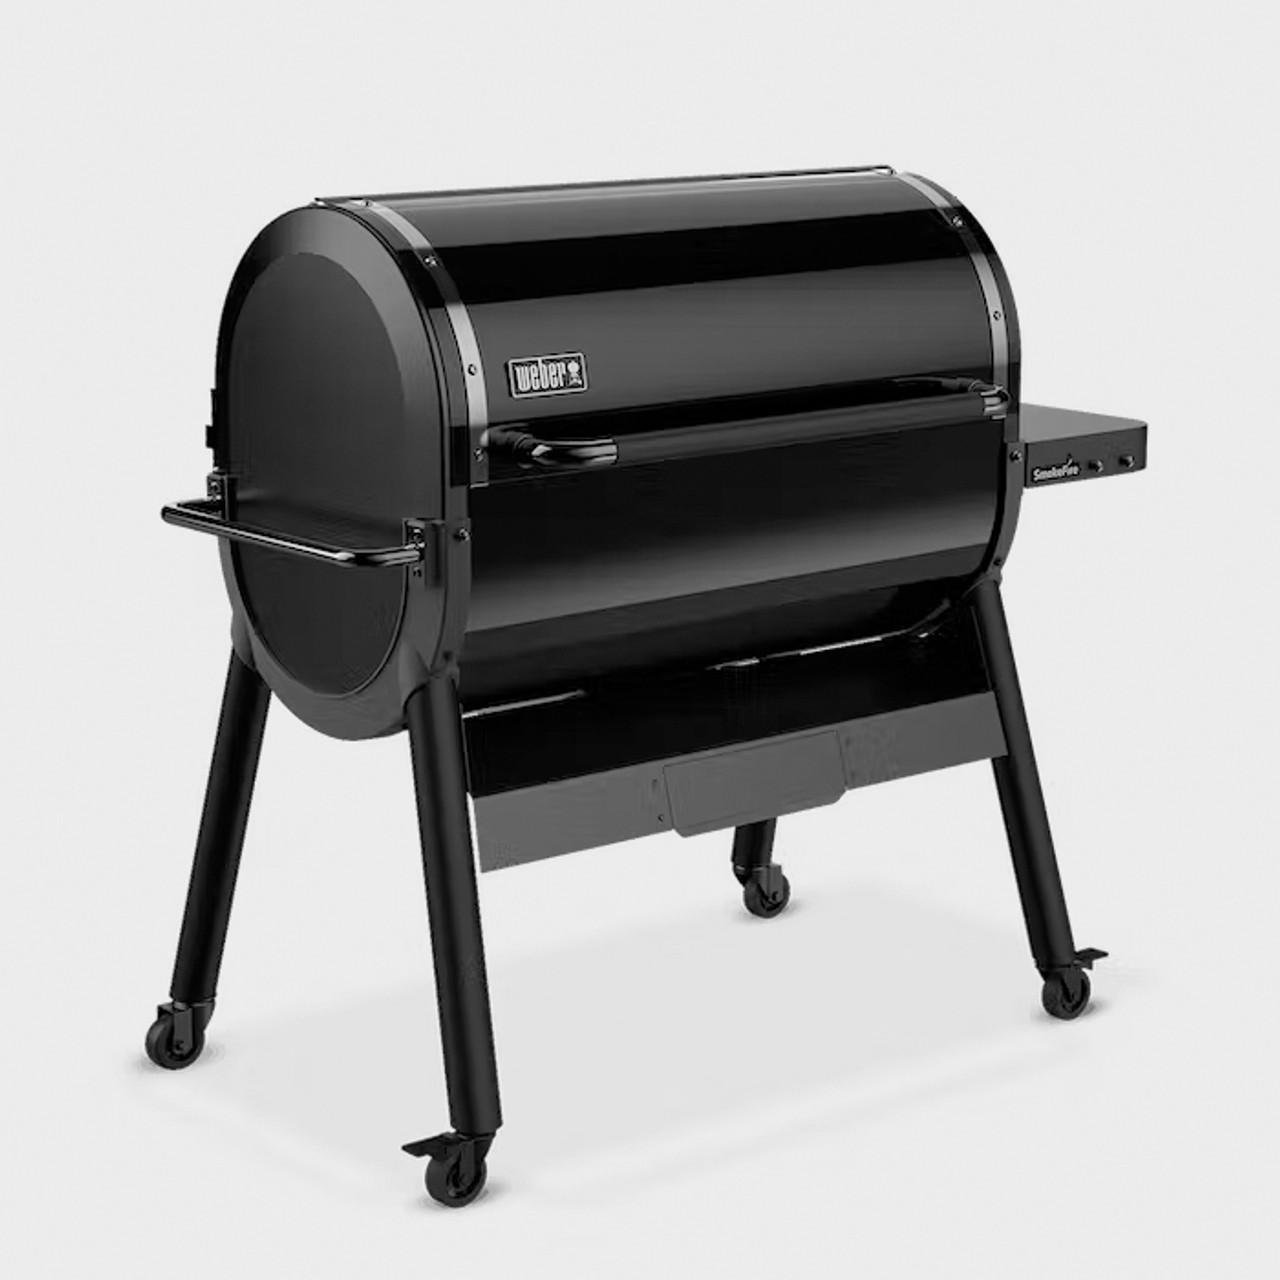 SmokeFire EPX6 Wood Fired Pellet Grill, STEALTH Edition *FREE ROASTER & THERMOMETER